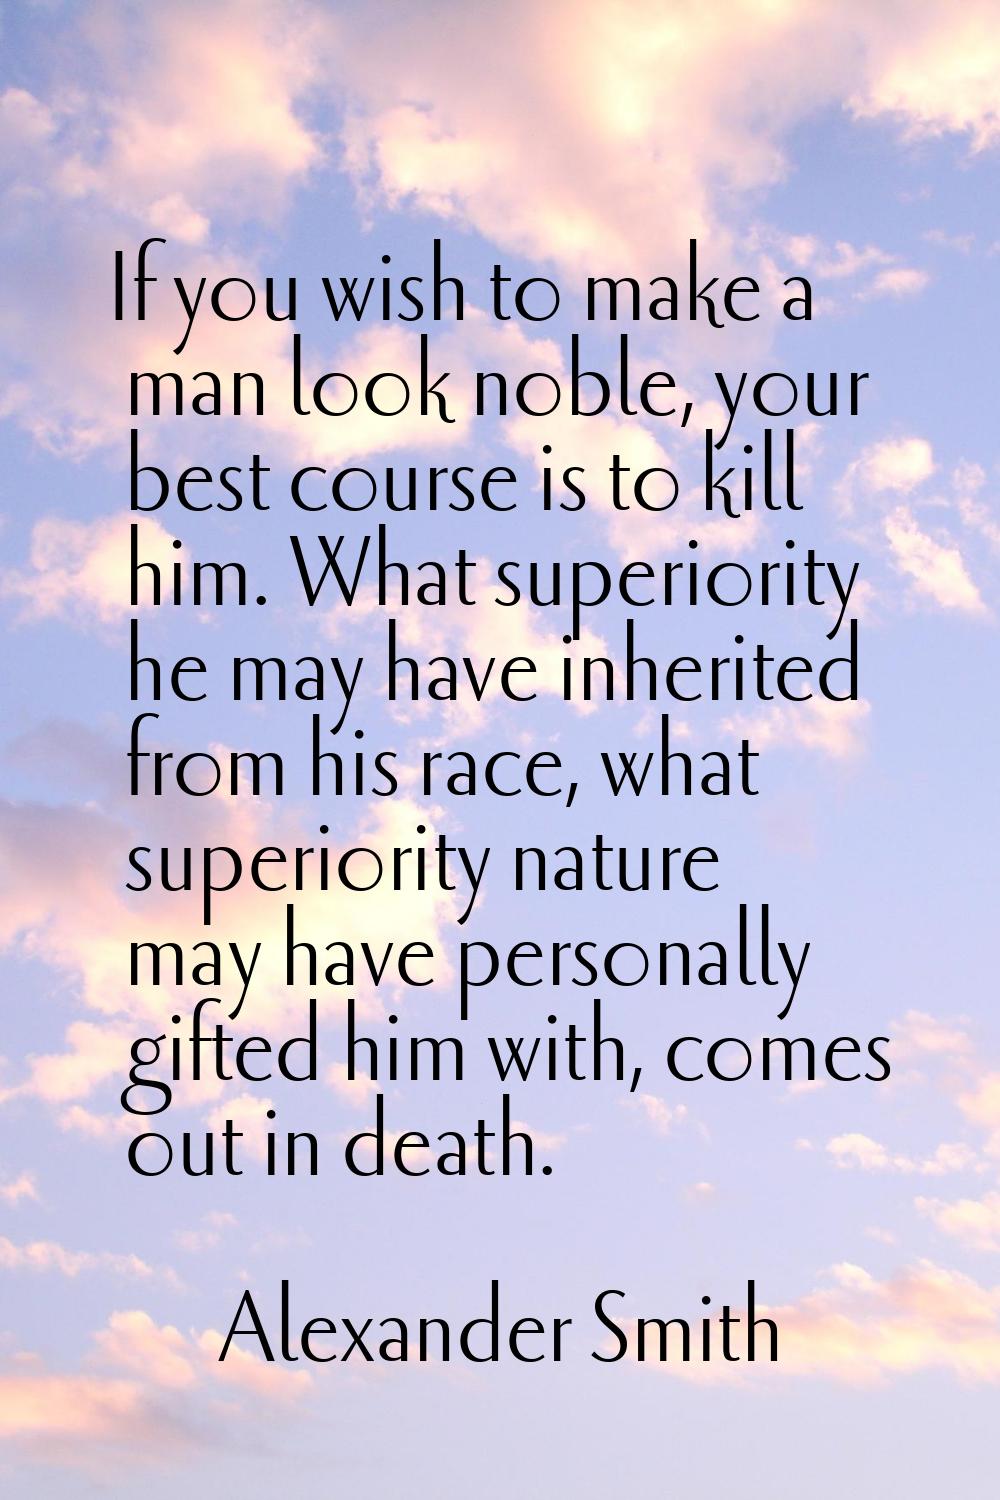 If you wish to make a man look noble, your best course is to kill him. What superiority he may have